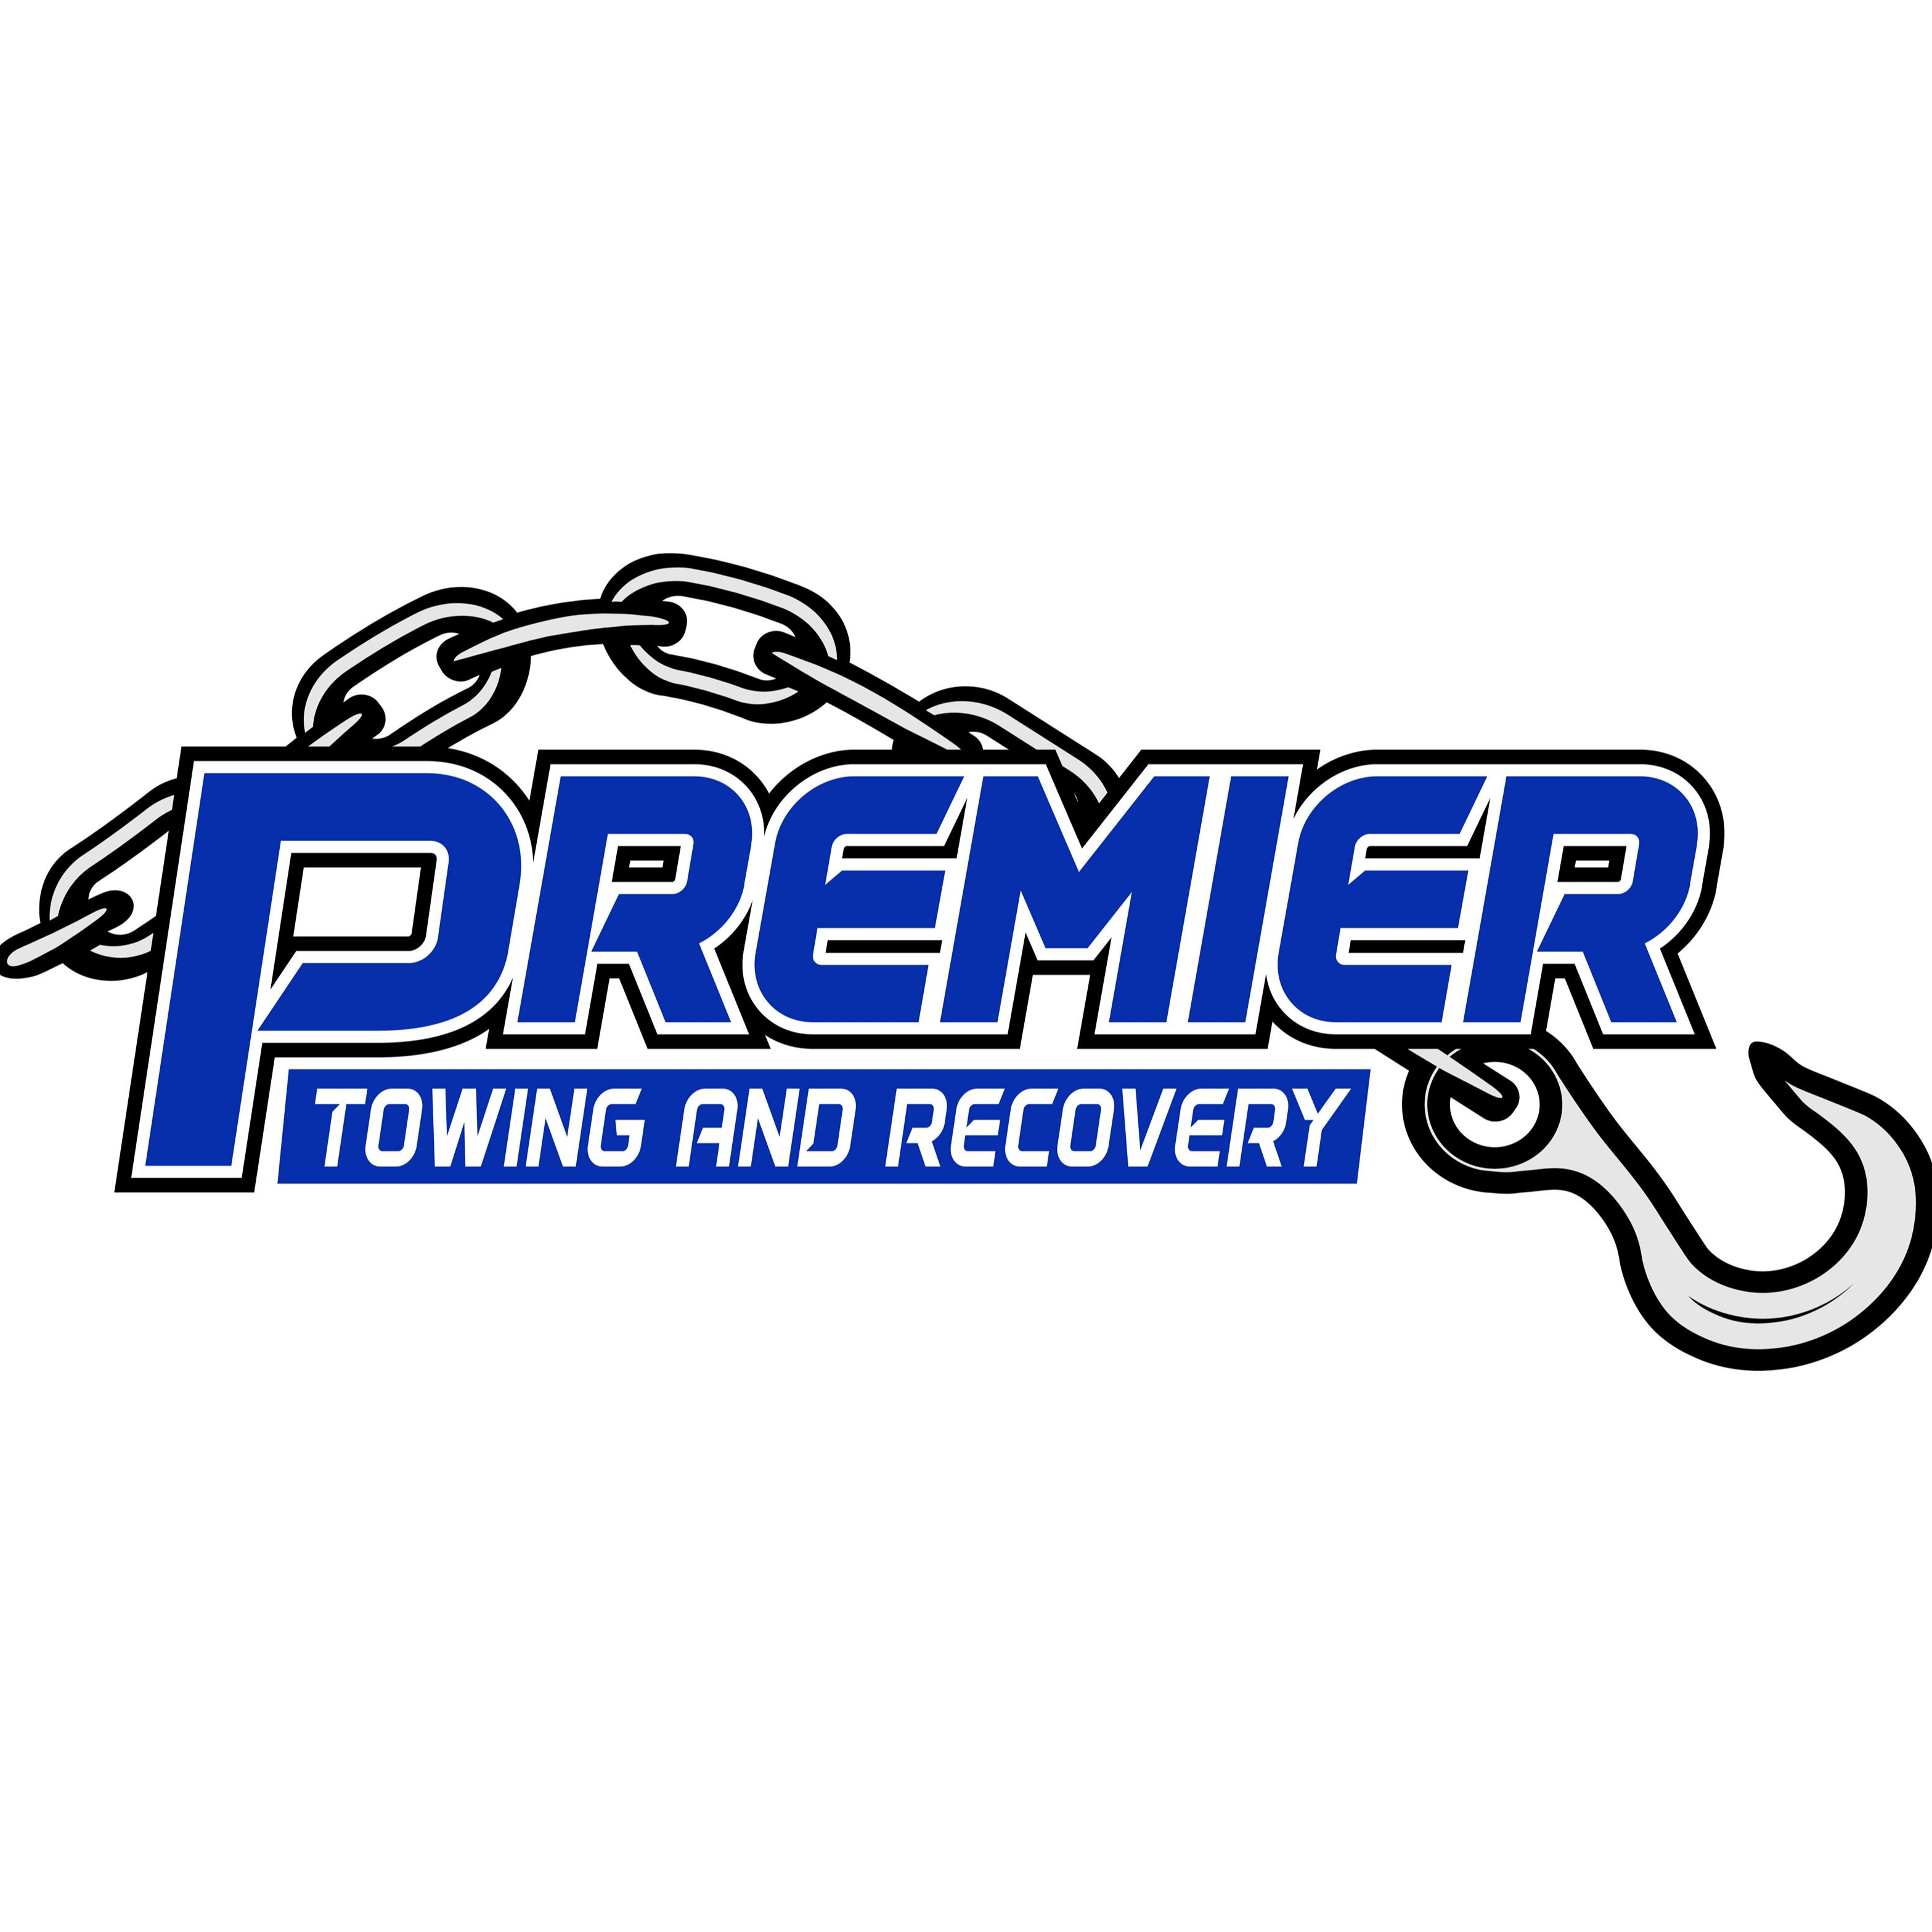 Premier Towing and Recovery logo